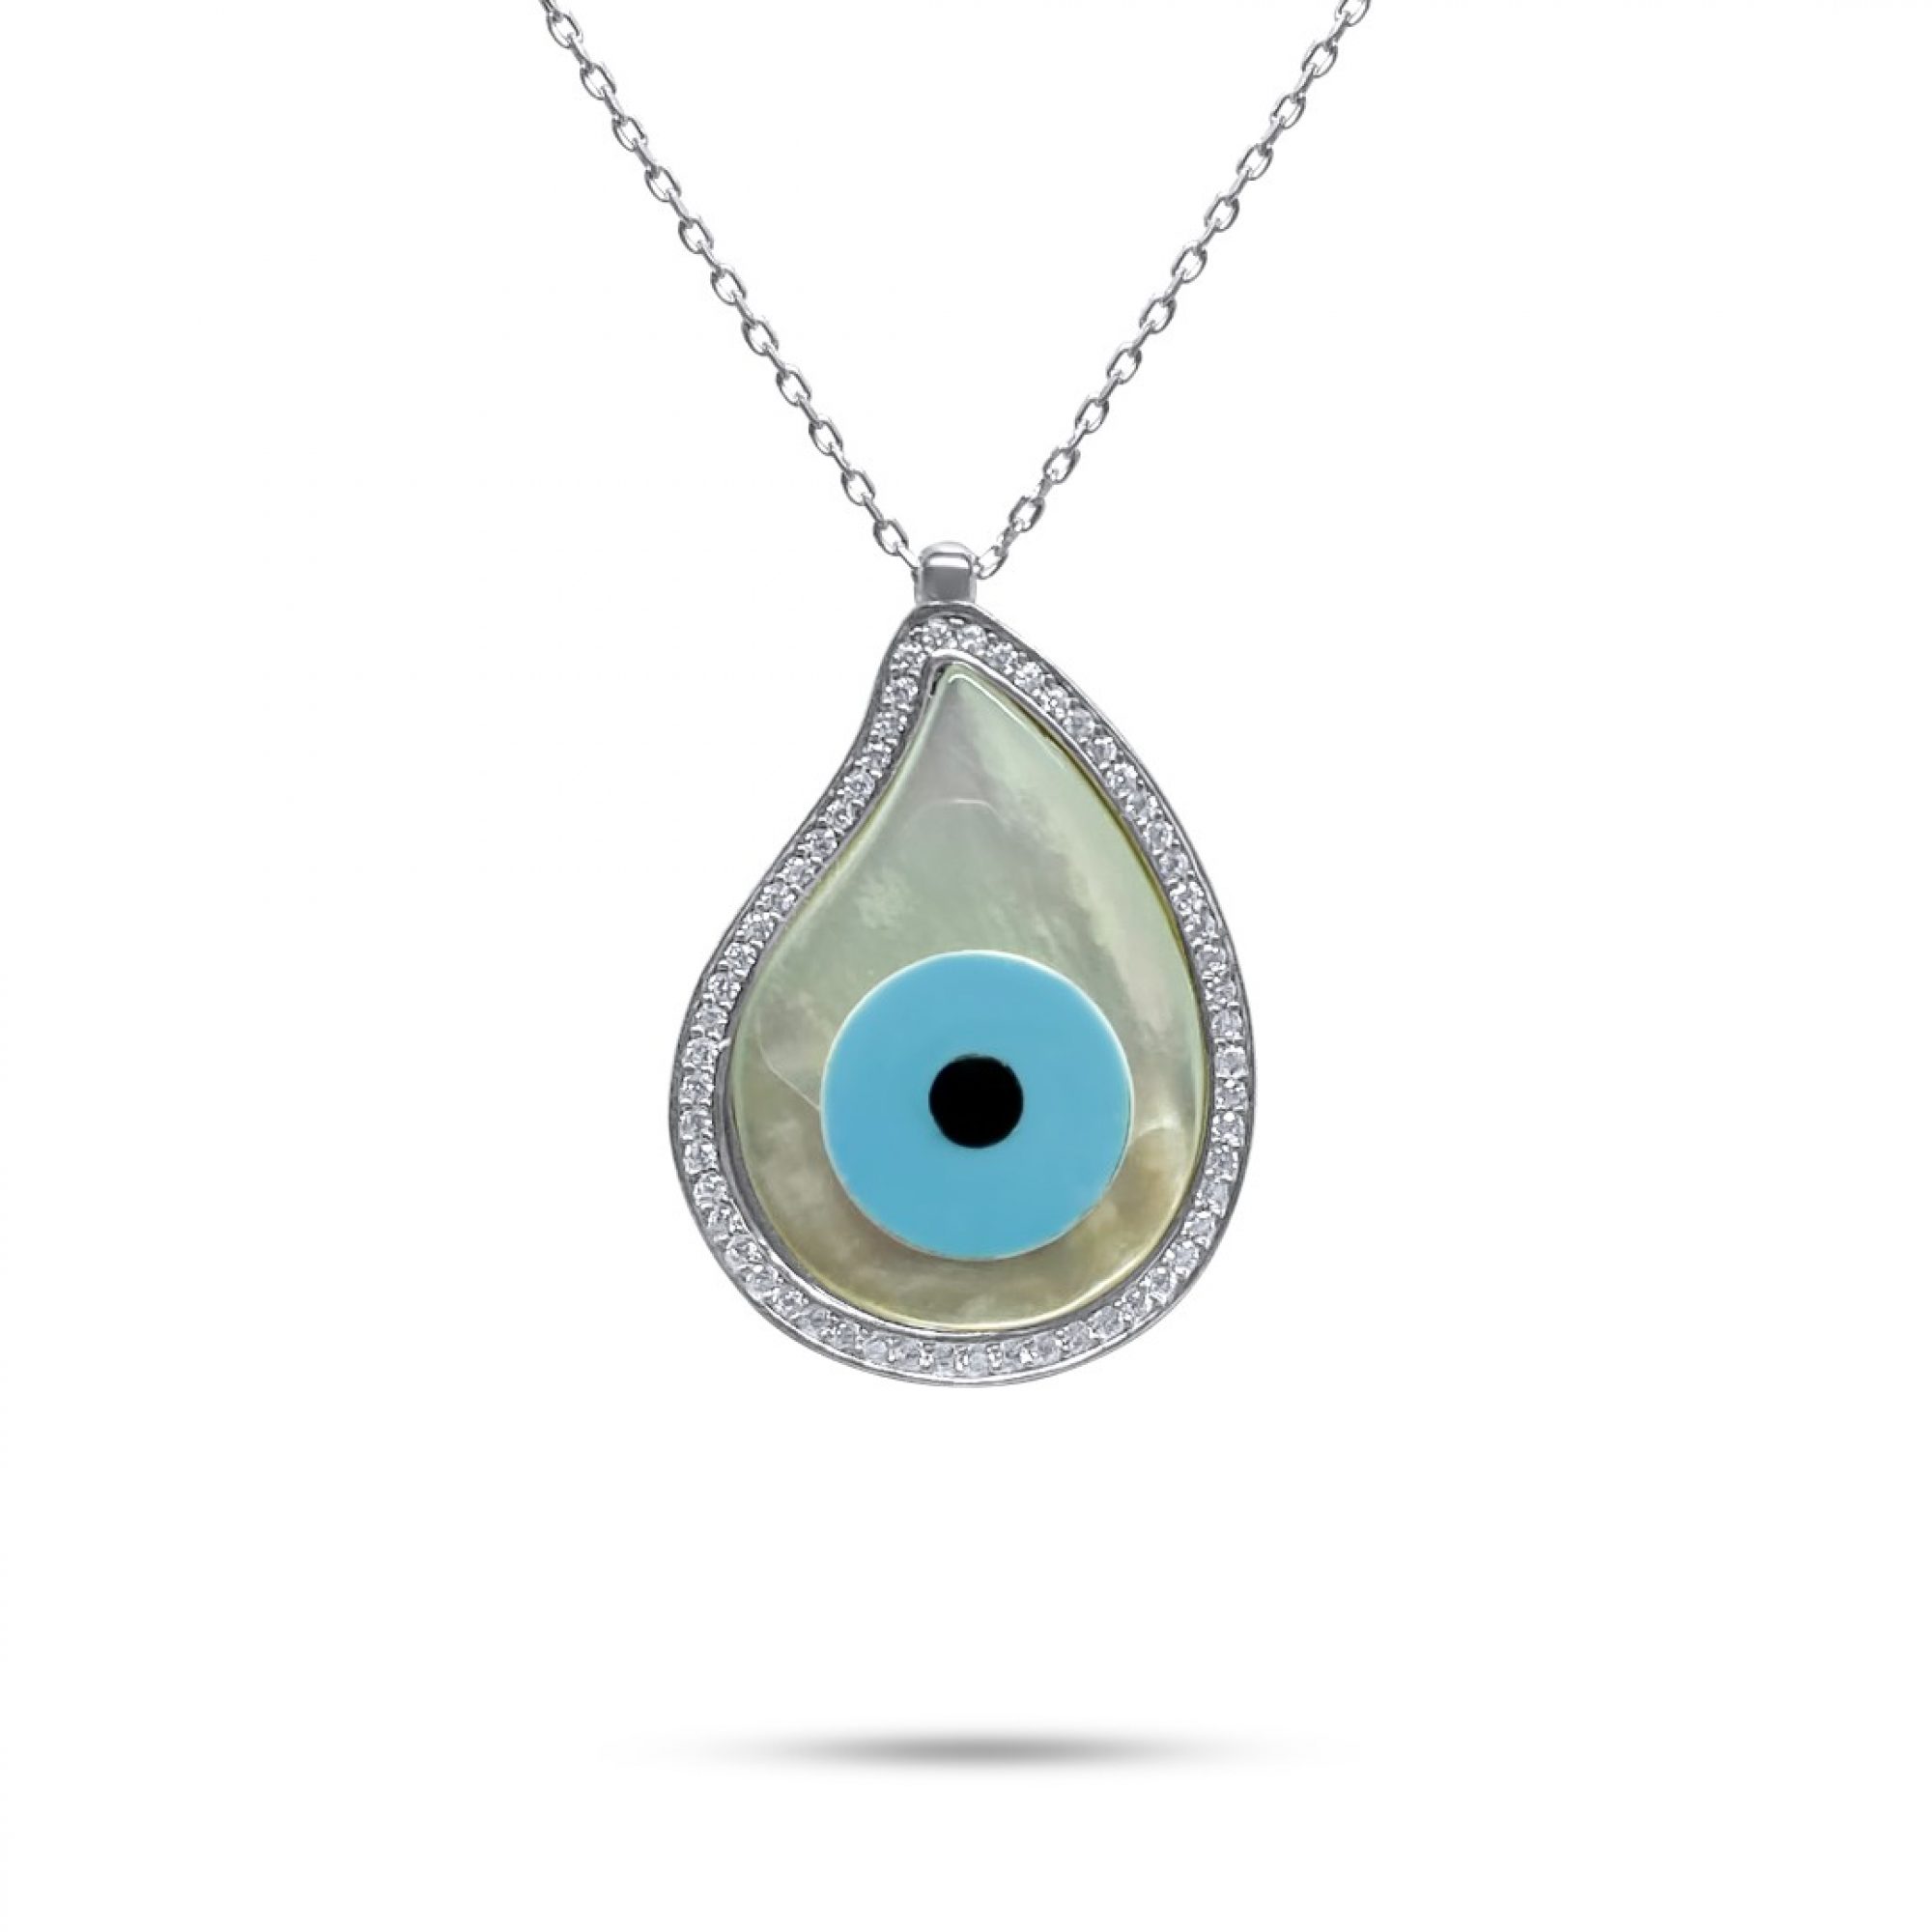 Eye necklace with mother of pearl and zircon stones